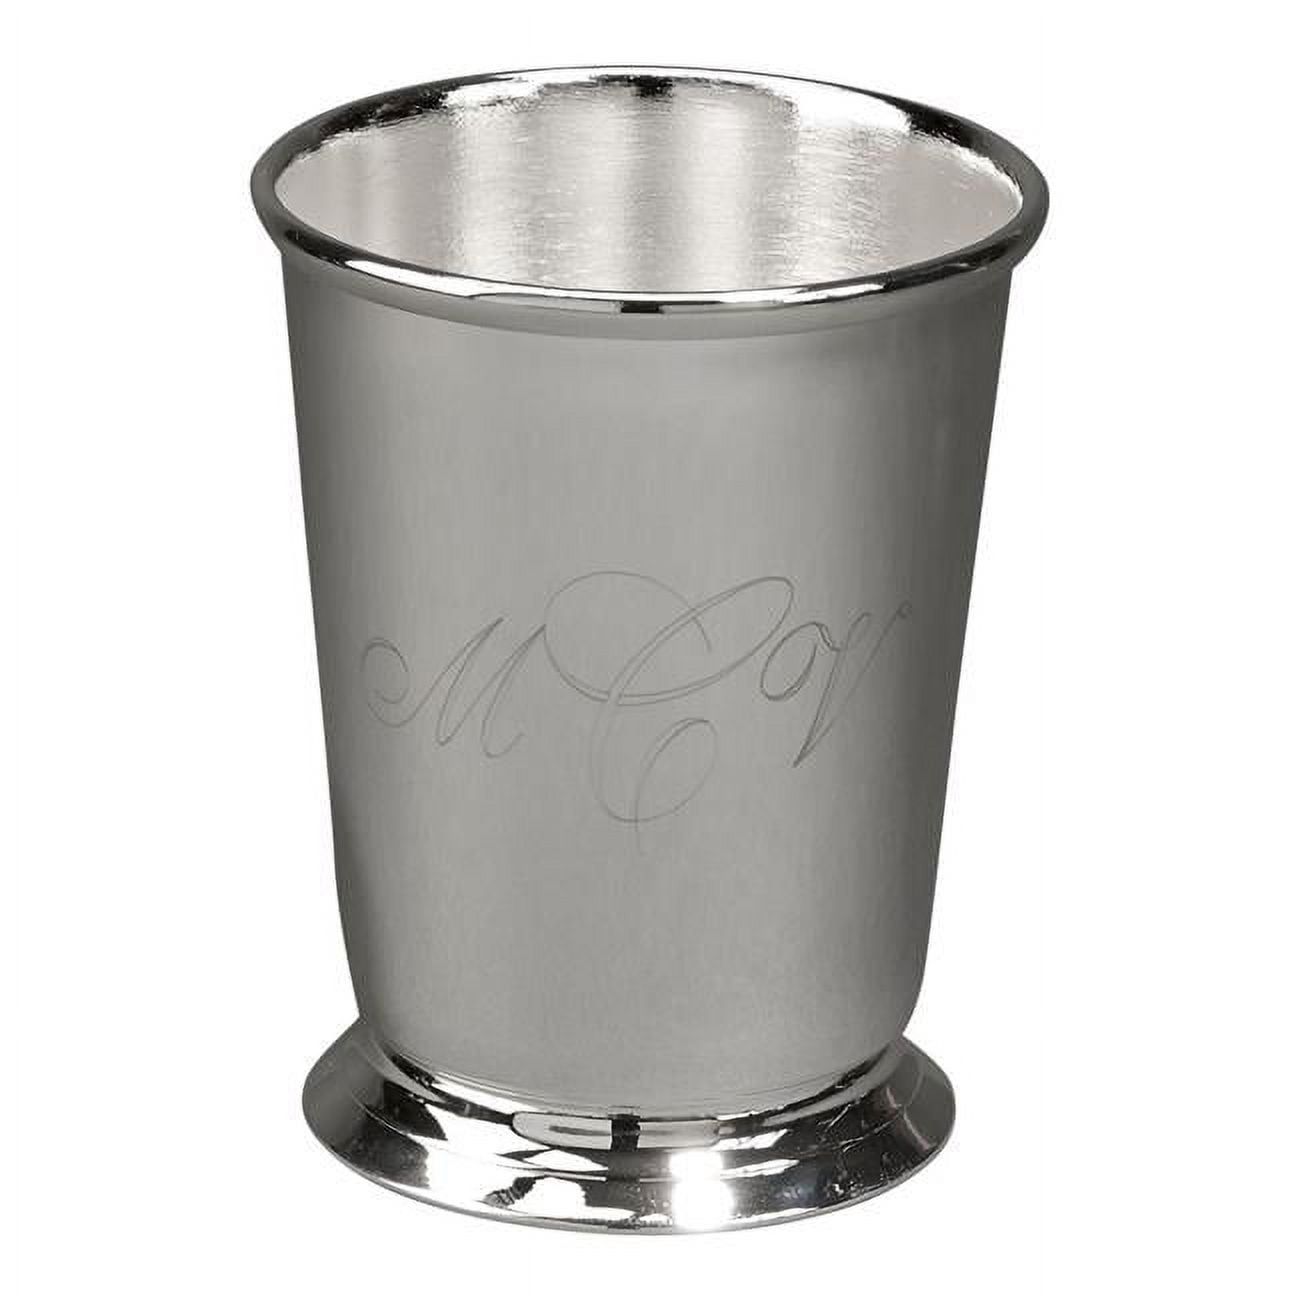 11 Oz Silver Plated Mint Julep Cup With 4 In. Capacity - Green